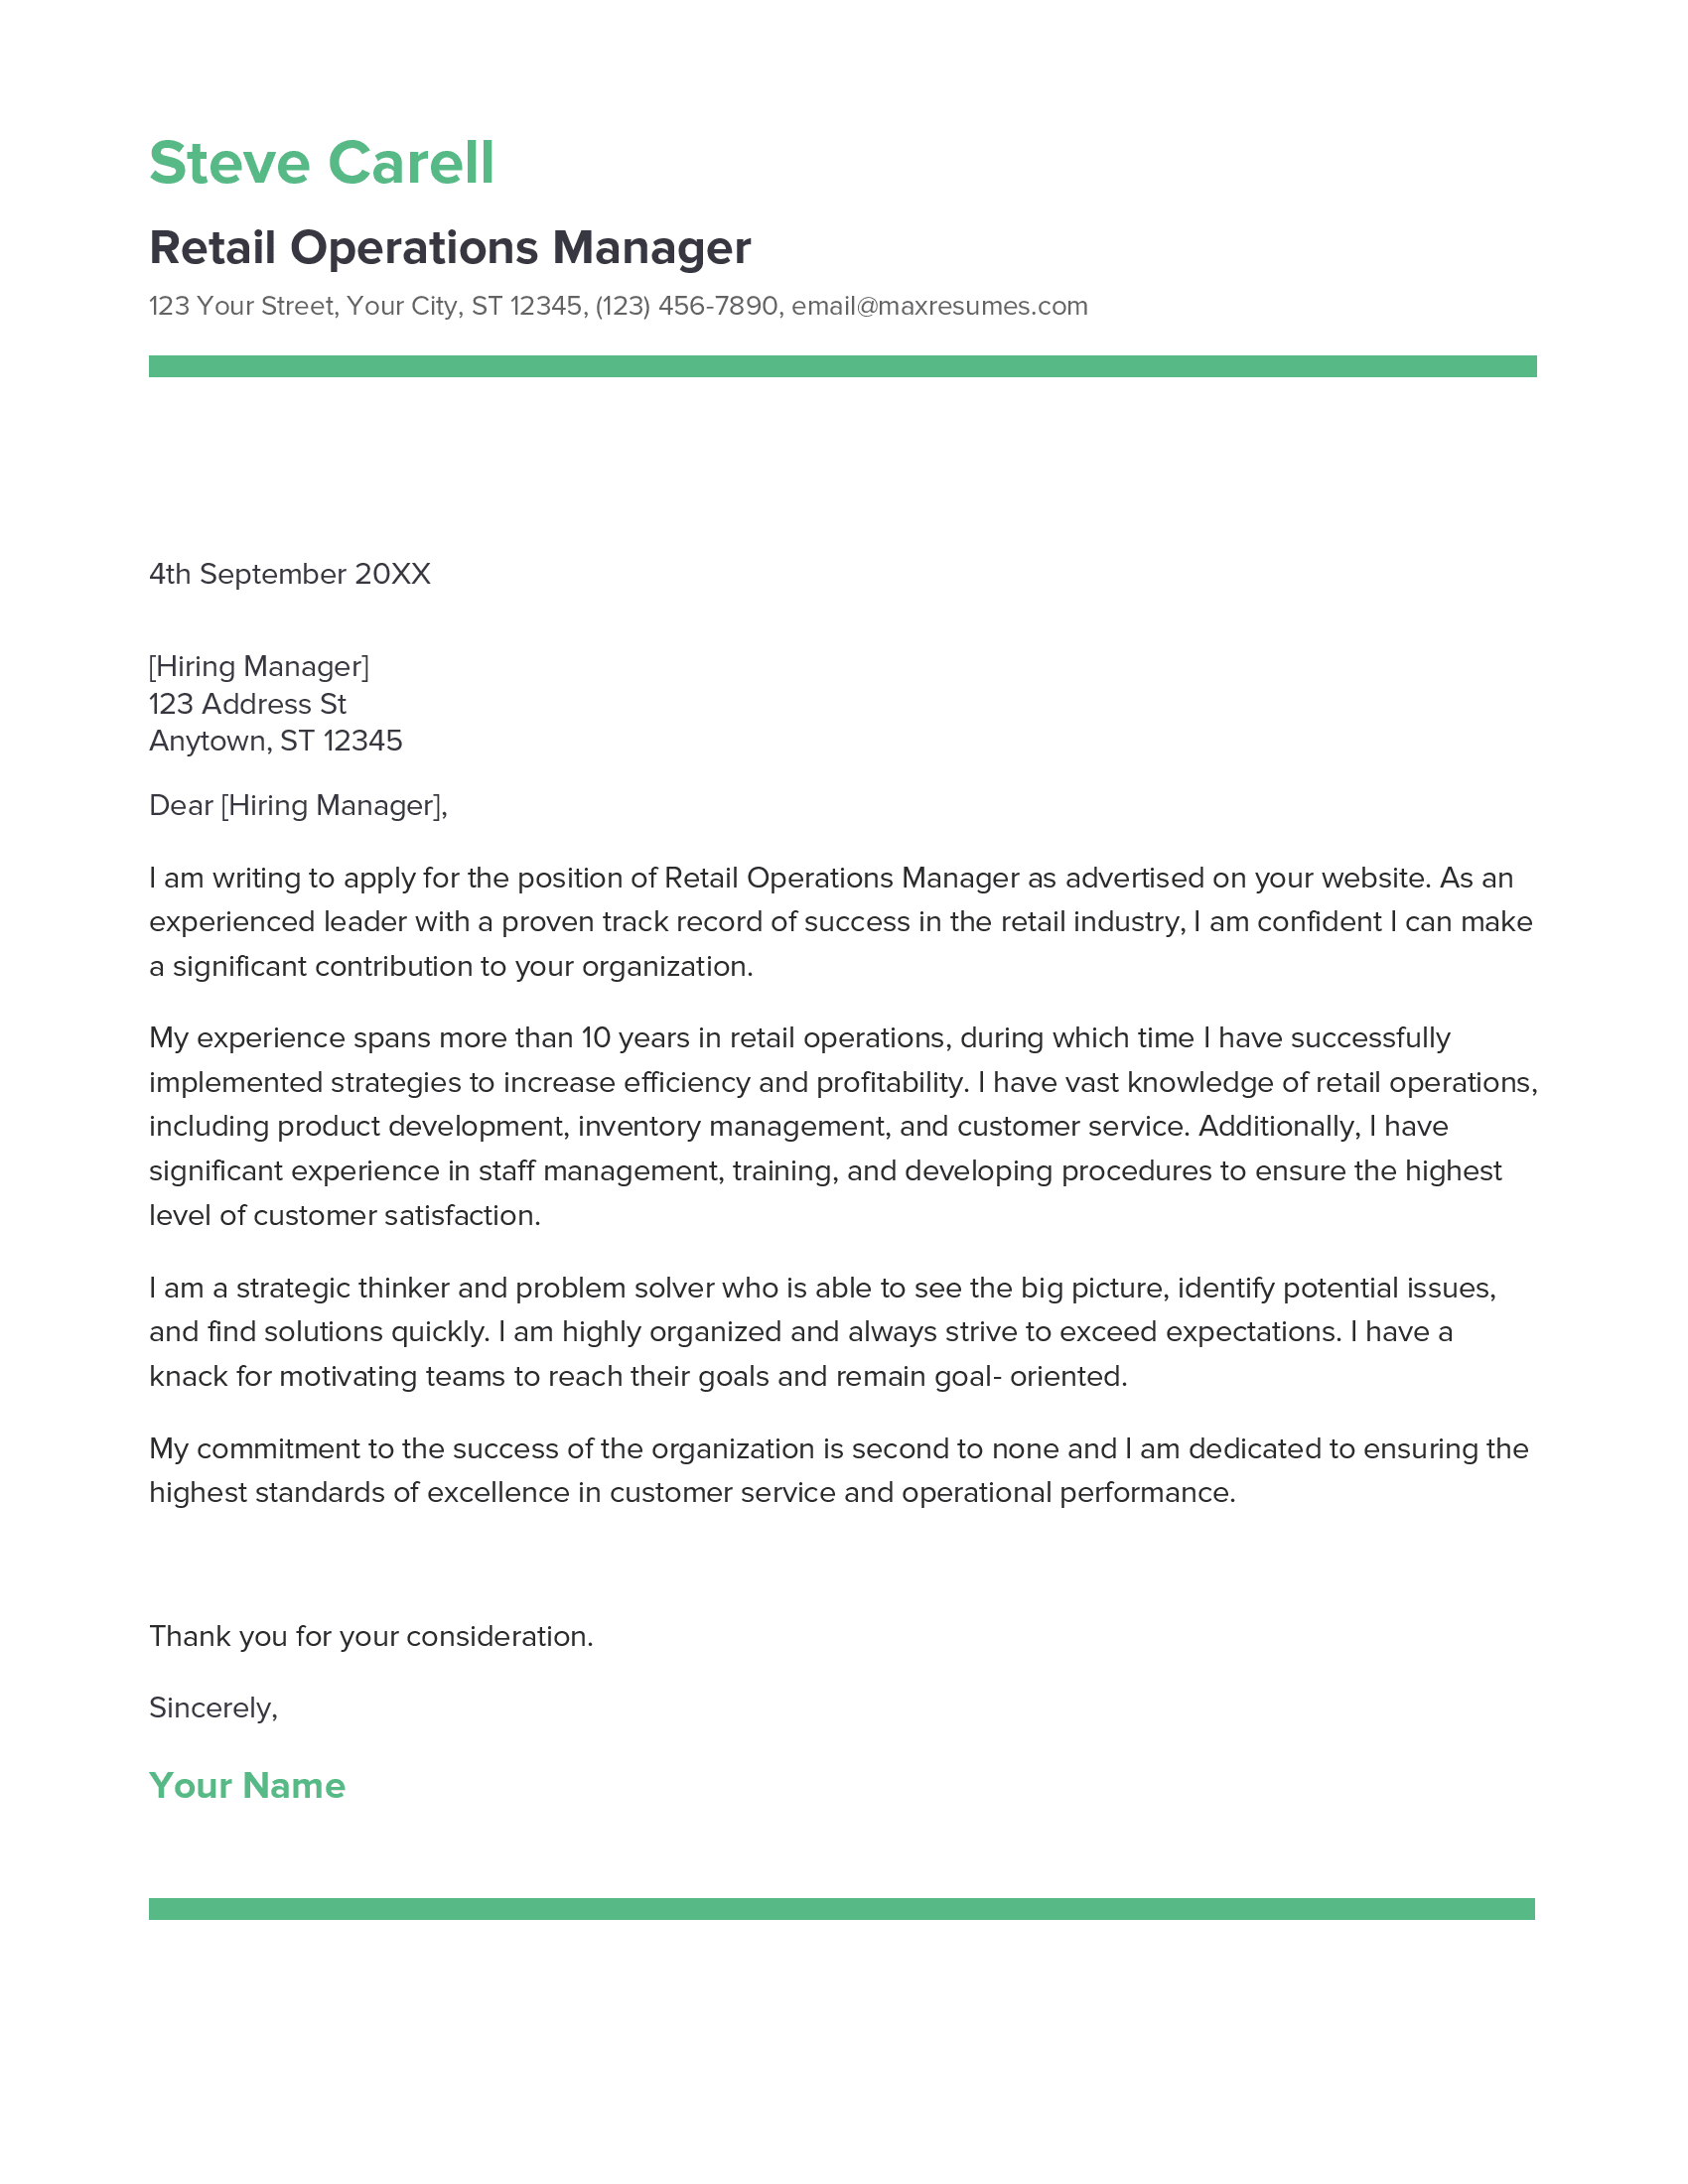 Retail Operations Manager Cover Letter Example